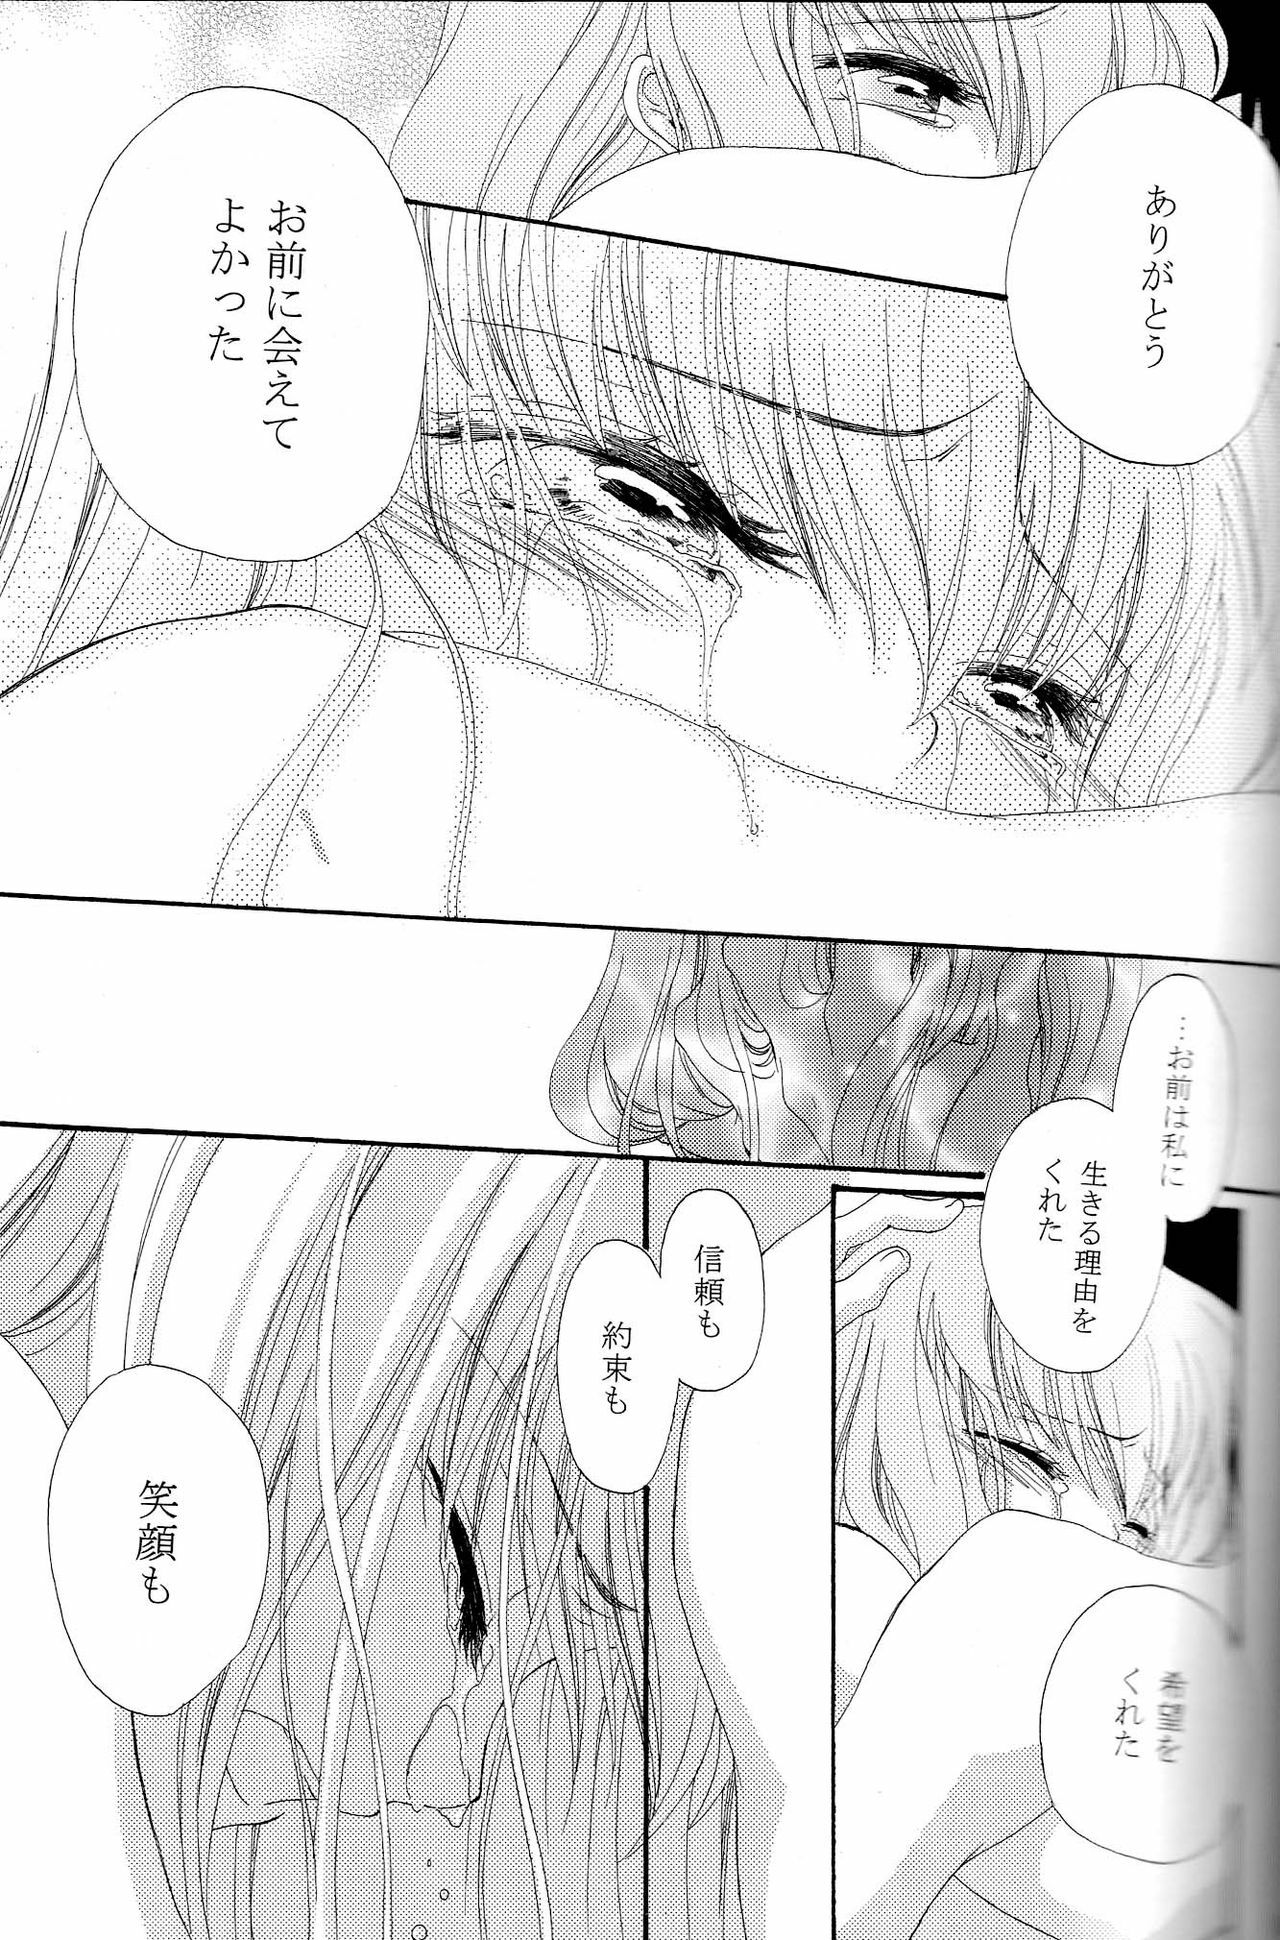 [APRICOT TEA] The last love letter presented to my dear only partner. (Code Geass) page 32 full